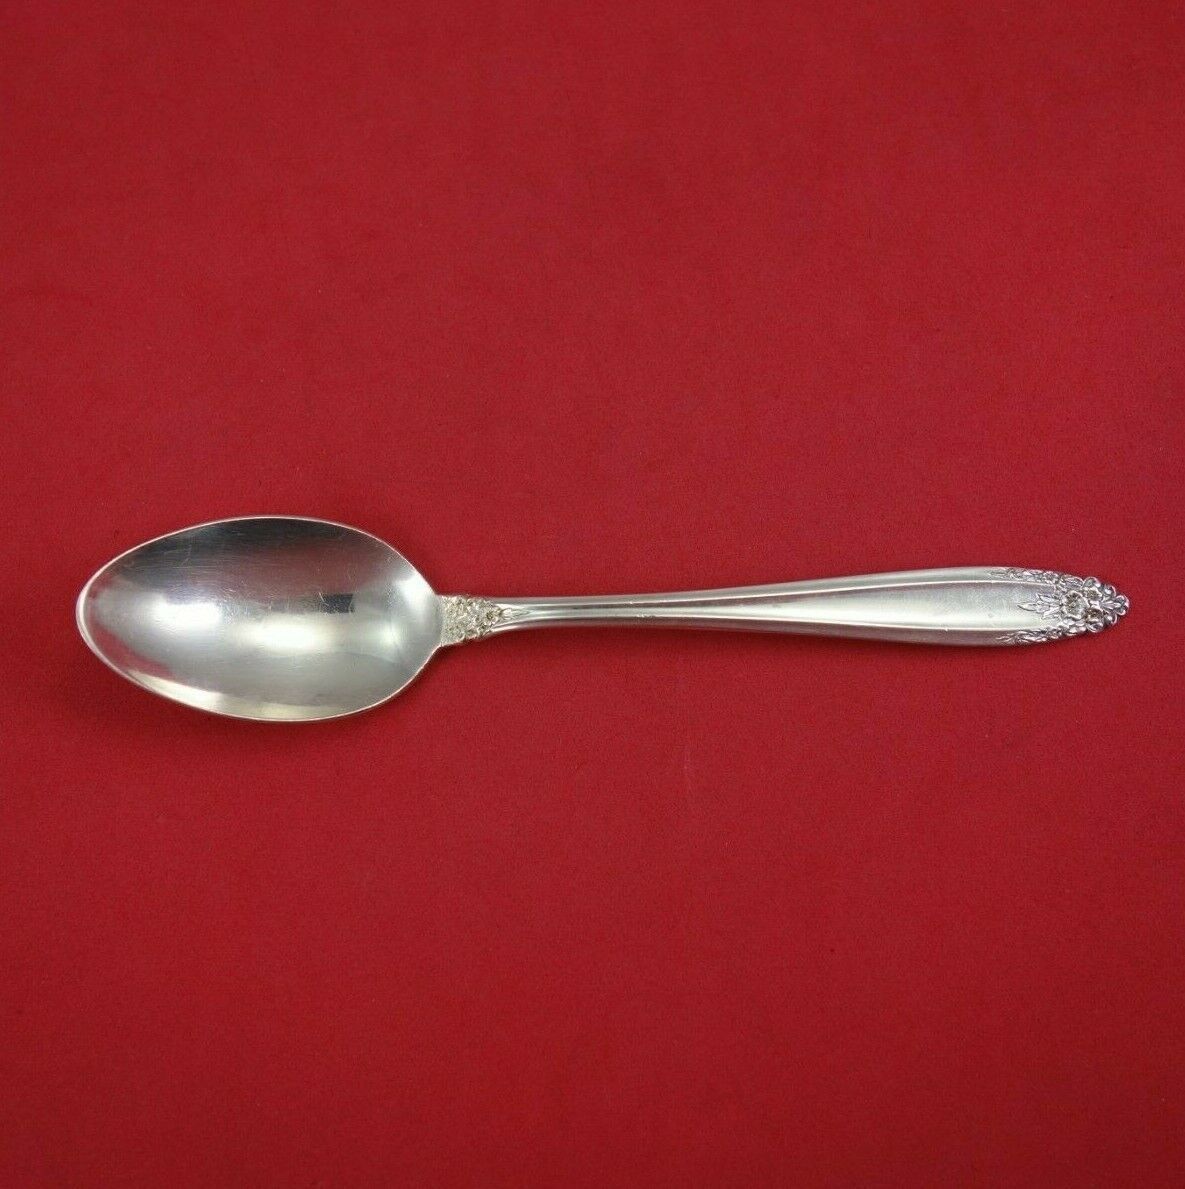 Prelude by International Sterling Silver 4 O'Clock Spoon 5 1/4" Vintage - $58.41